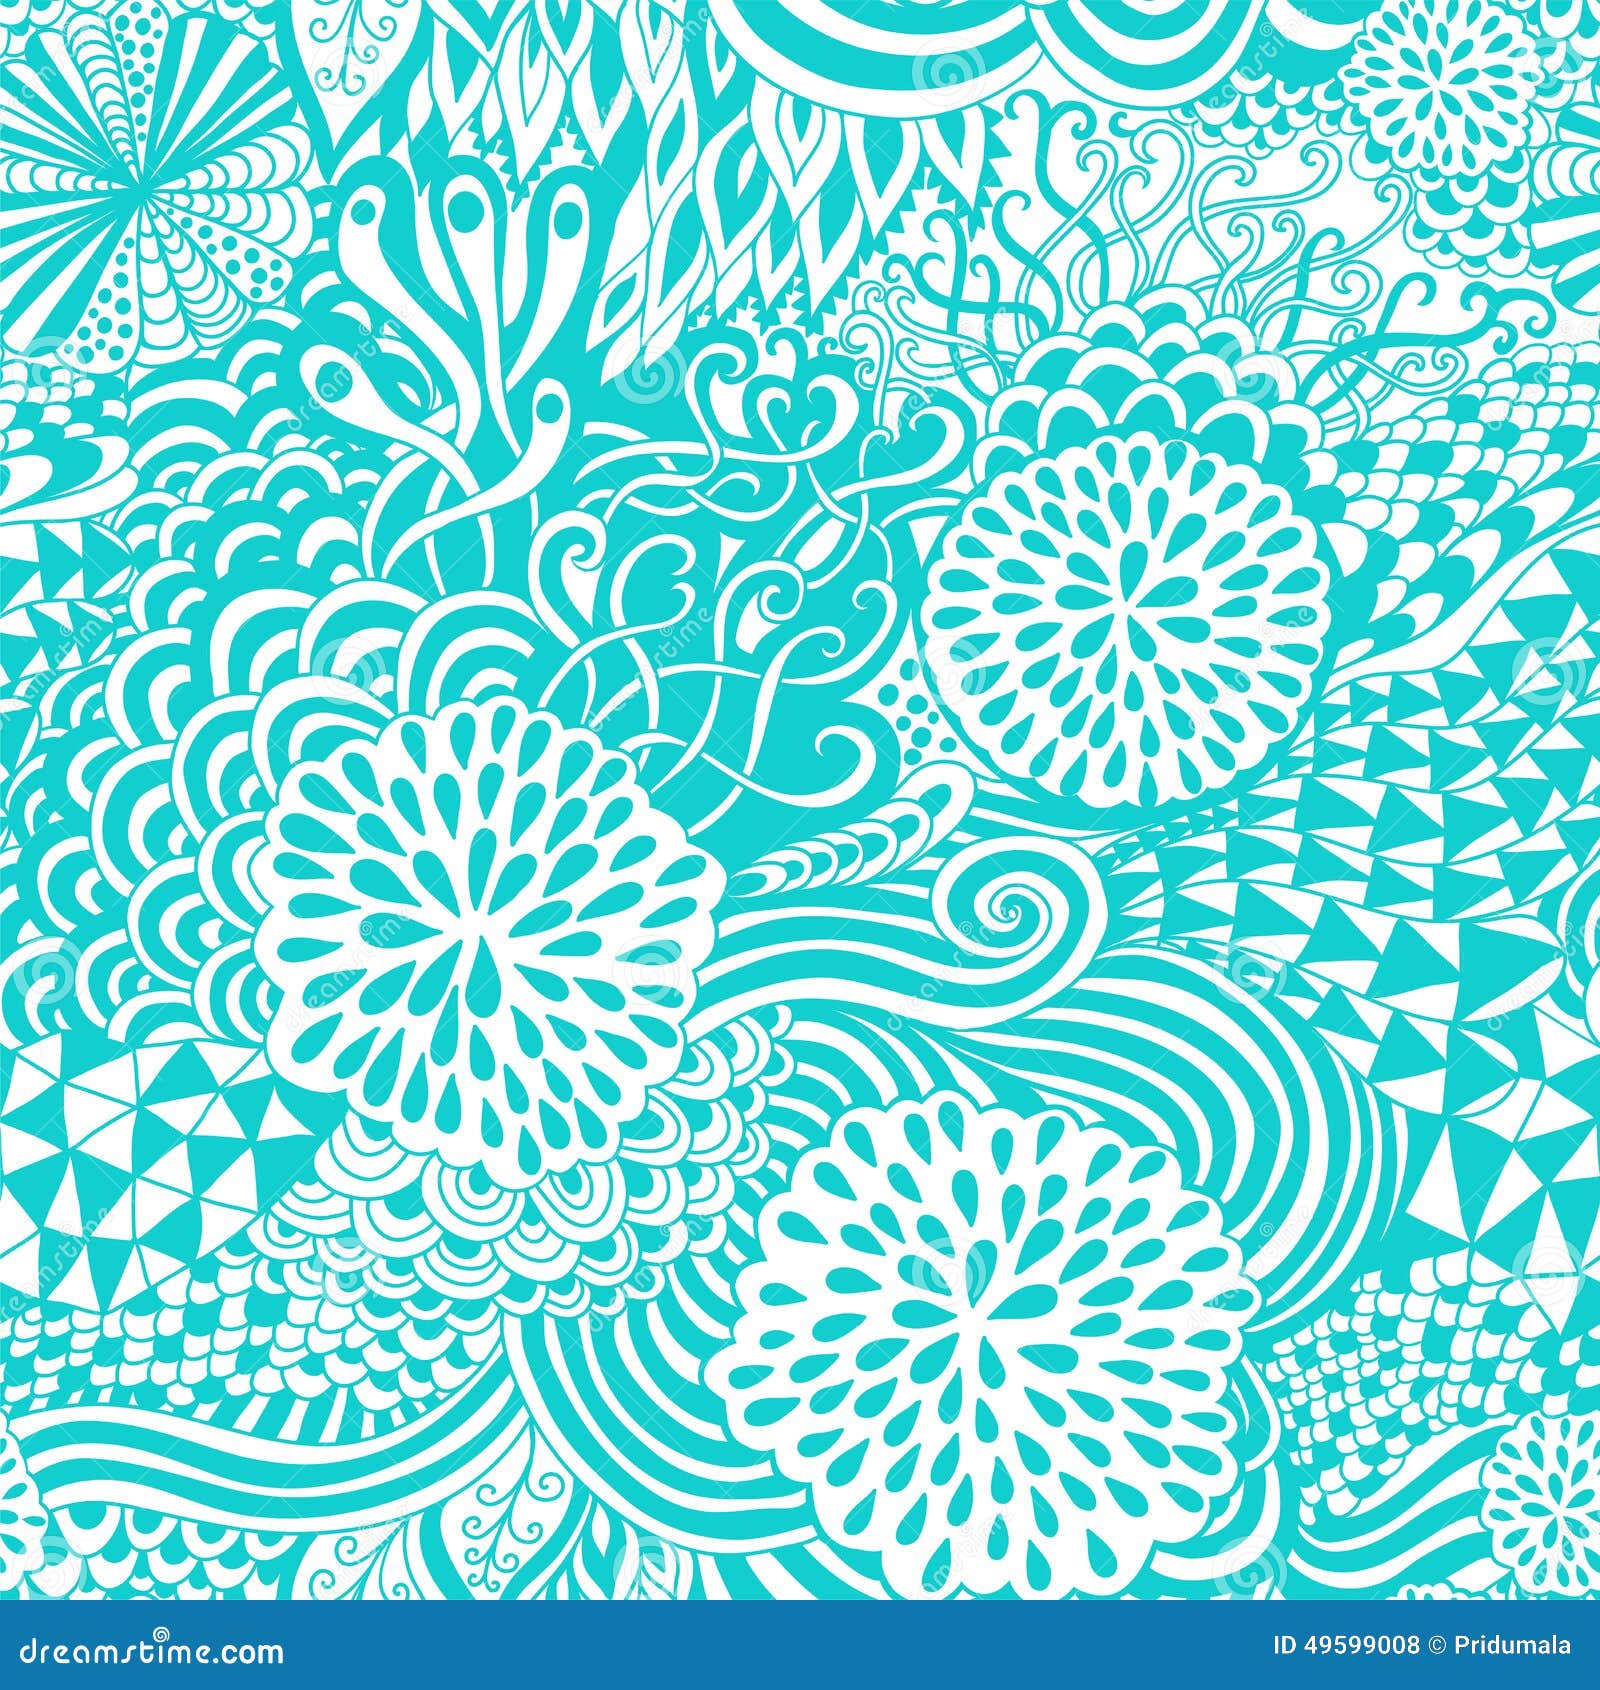 seamless wave hand-drawn pattern, waves background (seamlessly tiling).